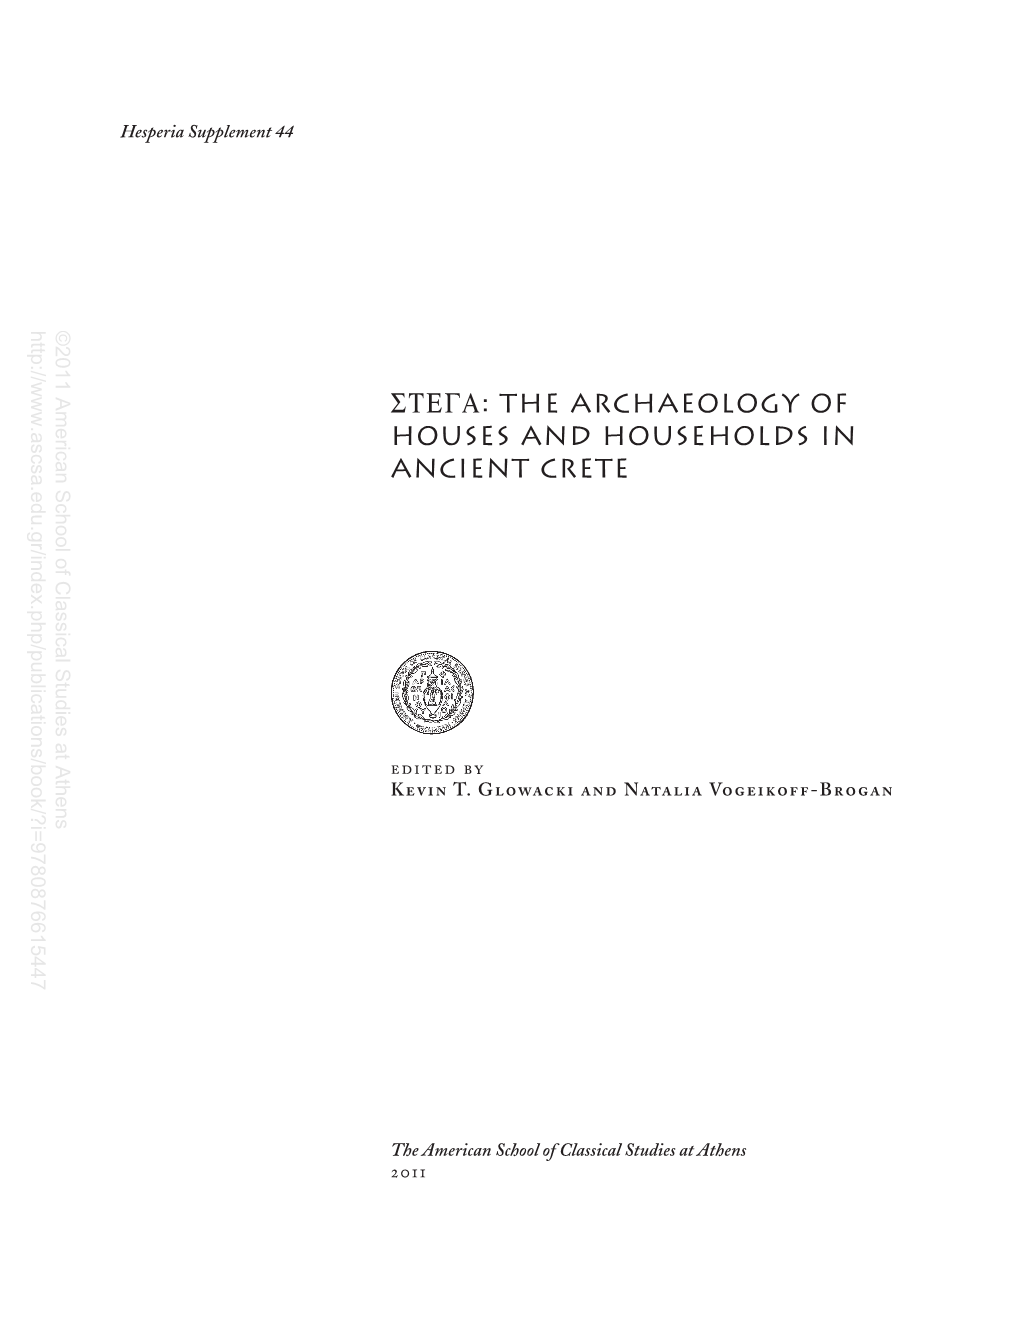 The Archaeology of Houses and Households in Ancient Crete School of Classical Studies At